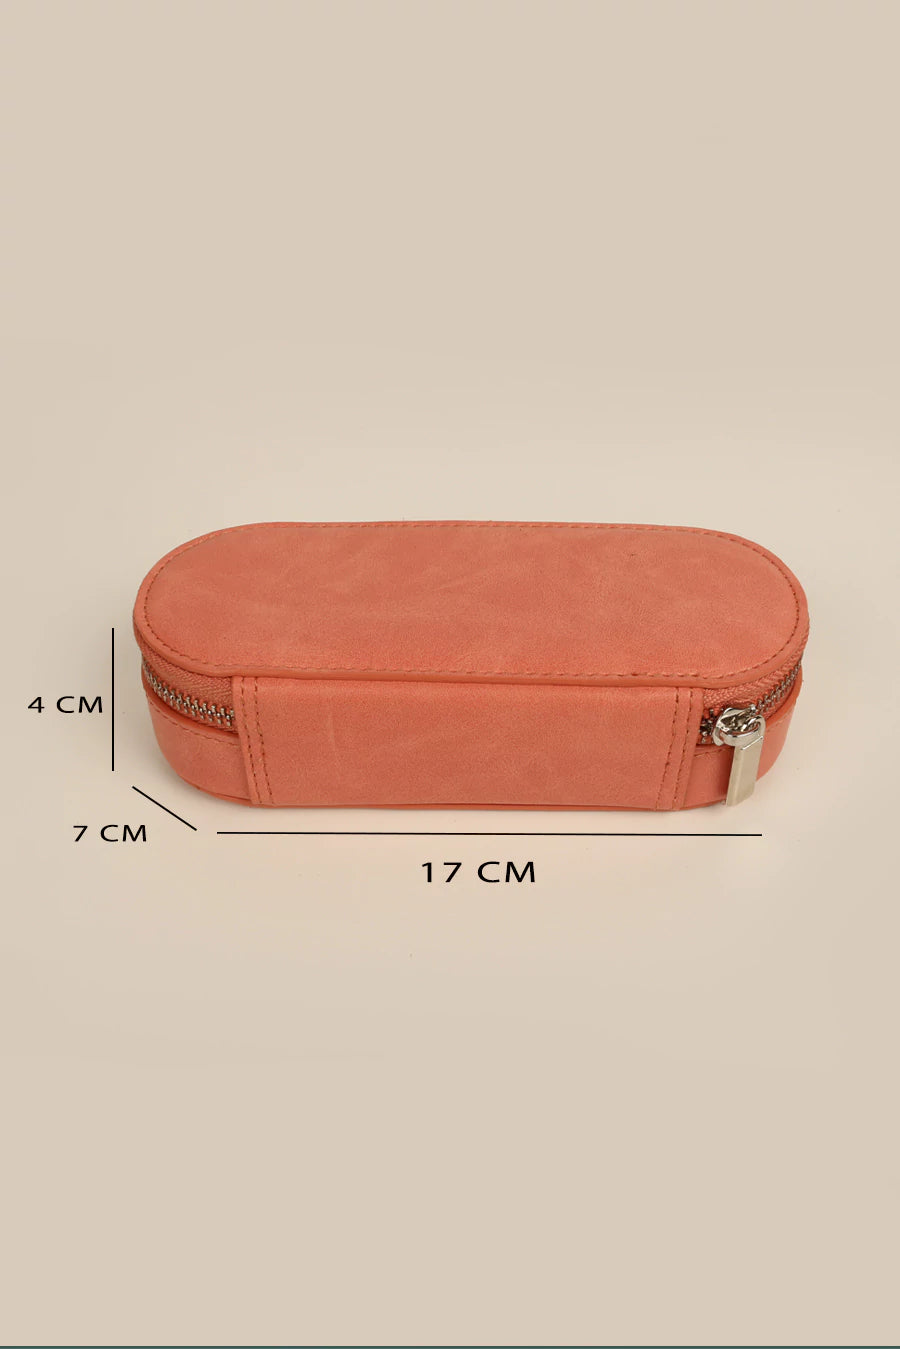 Vegan Leather Eyewear Case or Sunglass Cover Coral Measurement